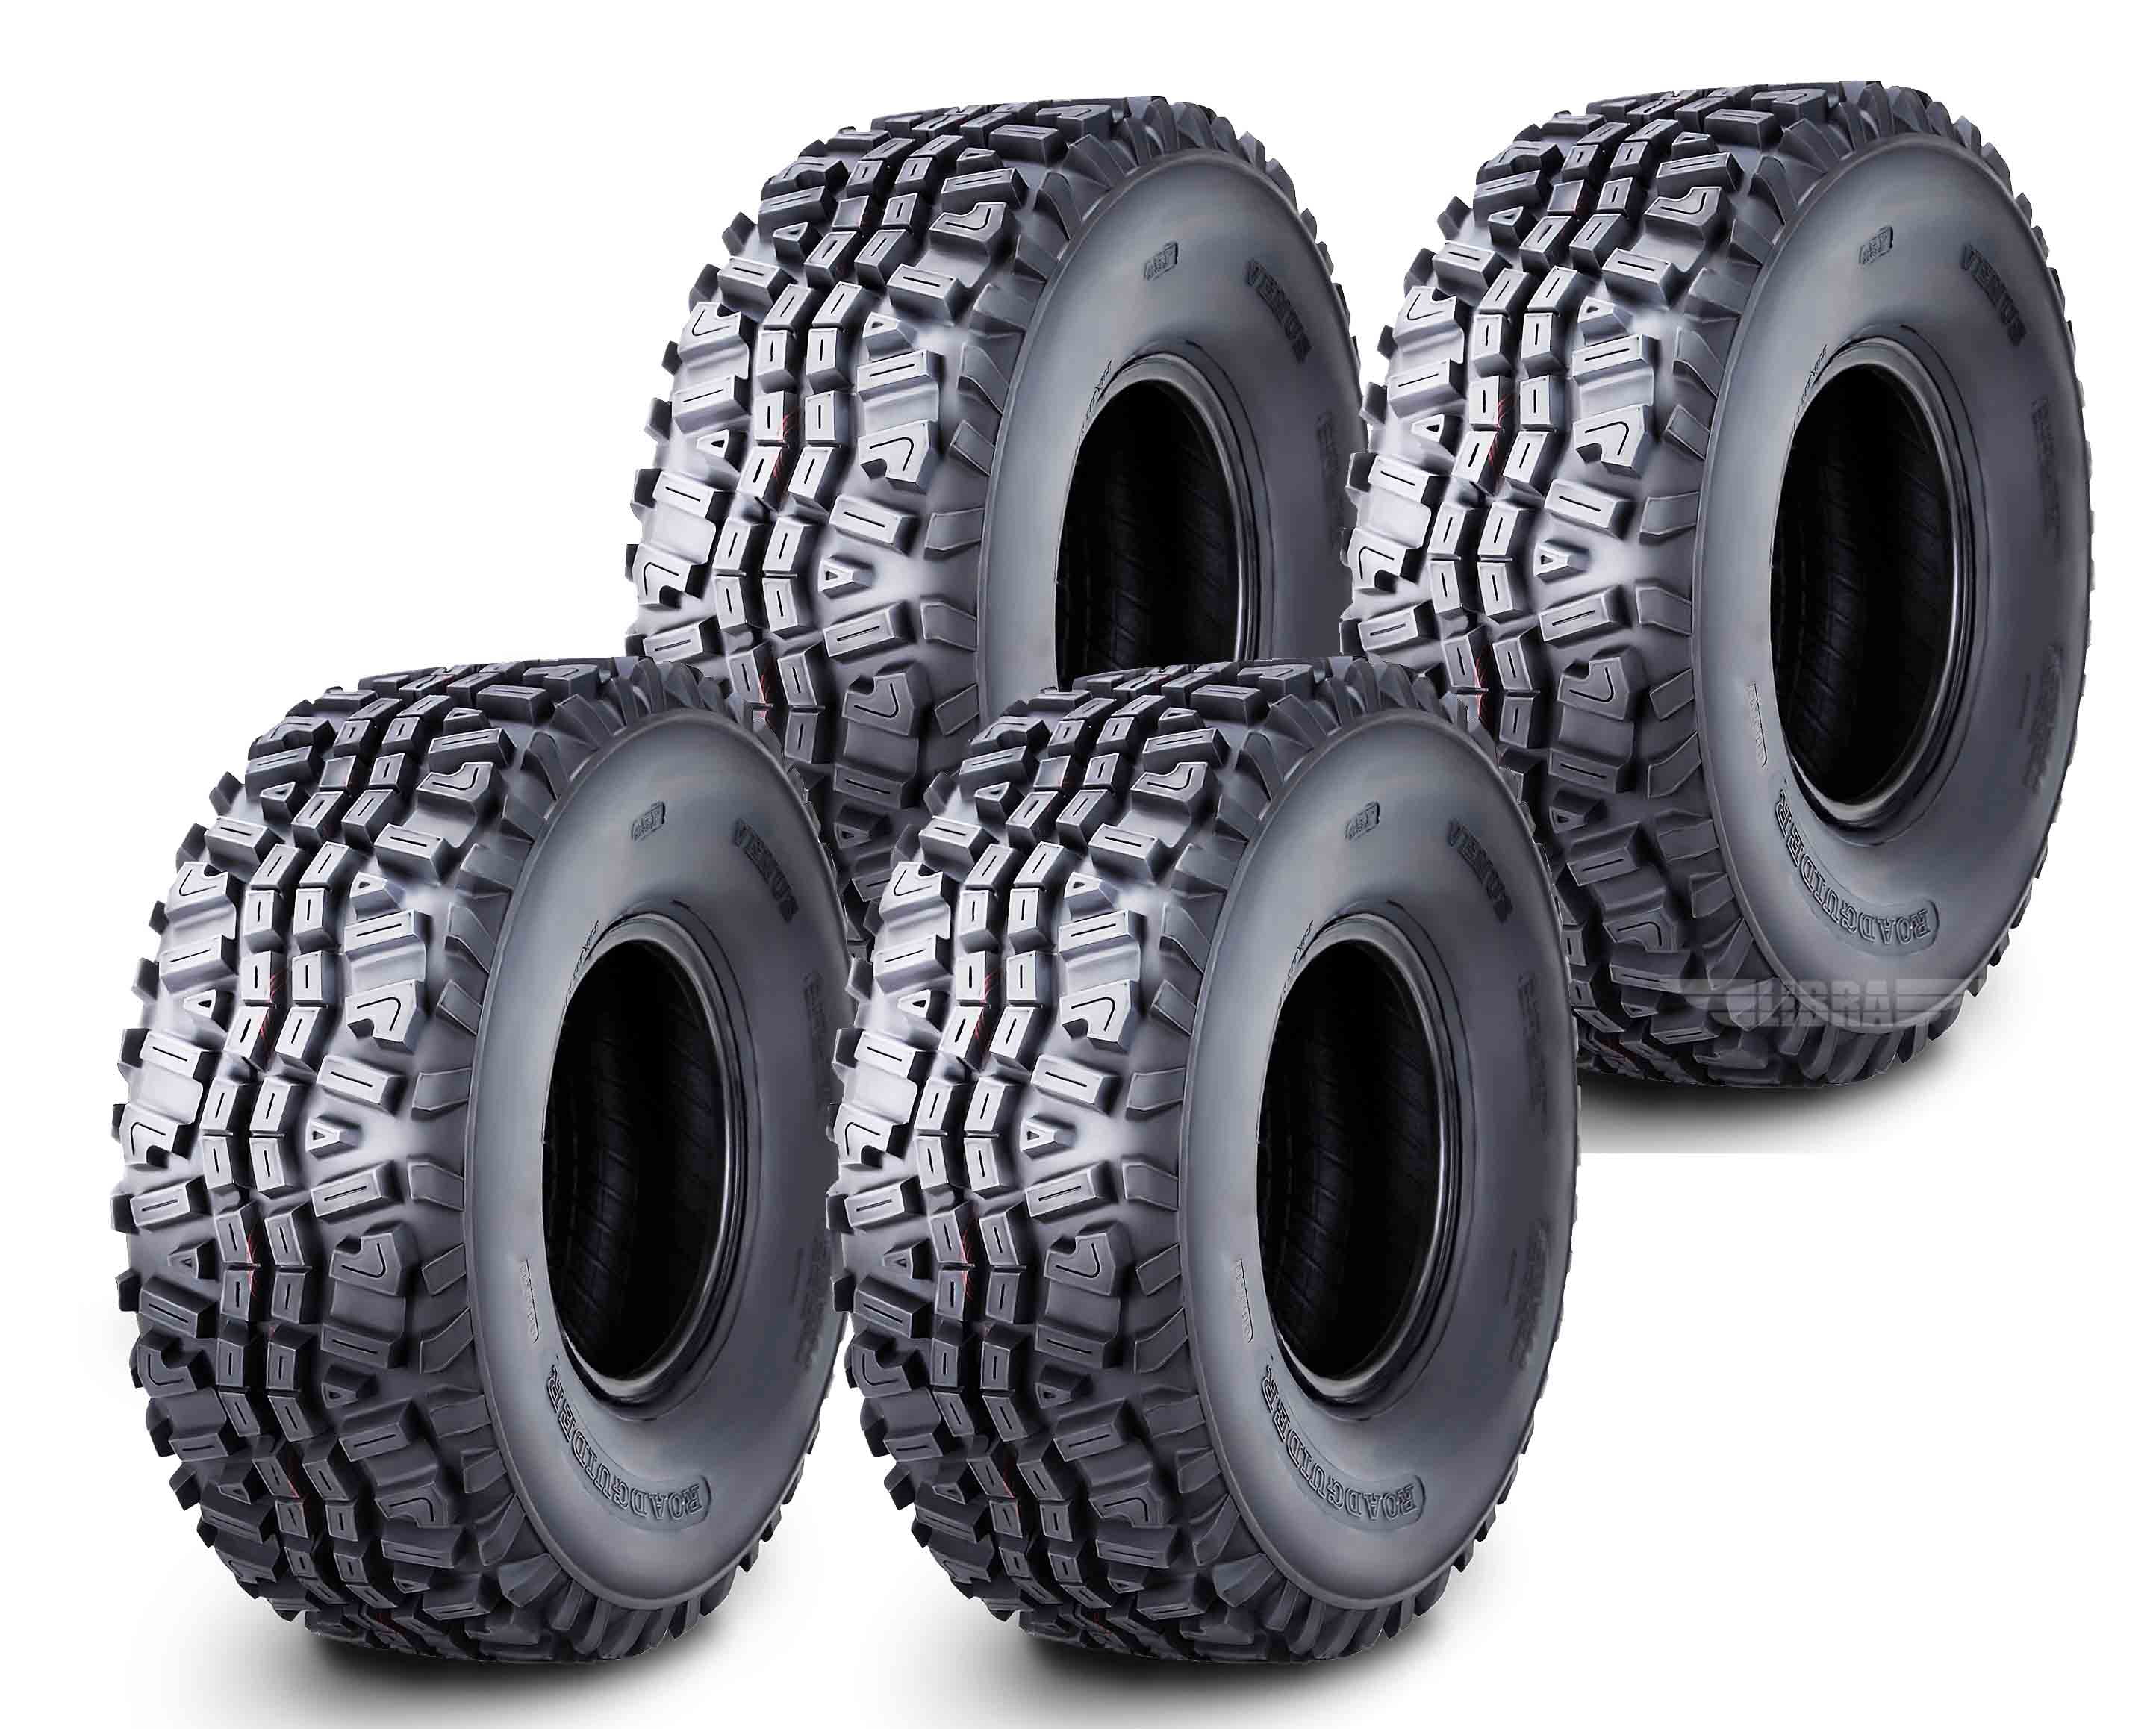 25x8-12 & 25x10-12 ATV UTV All Trail AT 6 Ply Tires A033 by SunF Set of 4